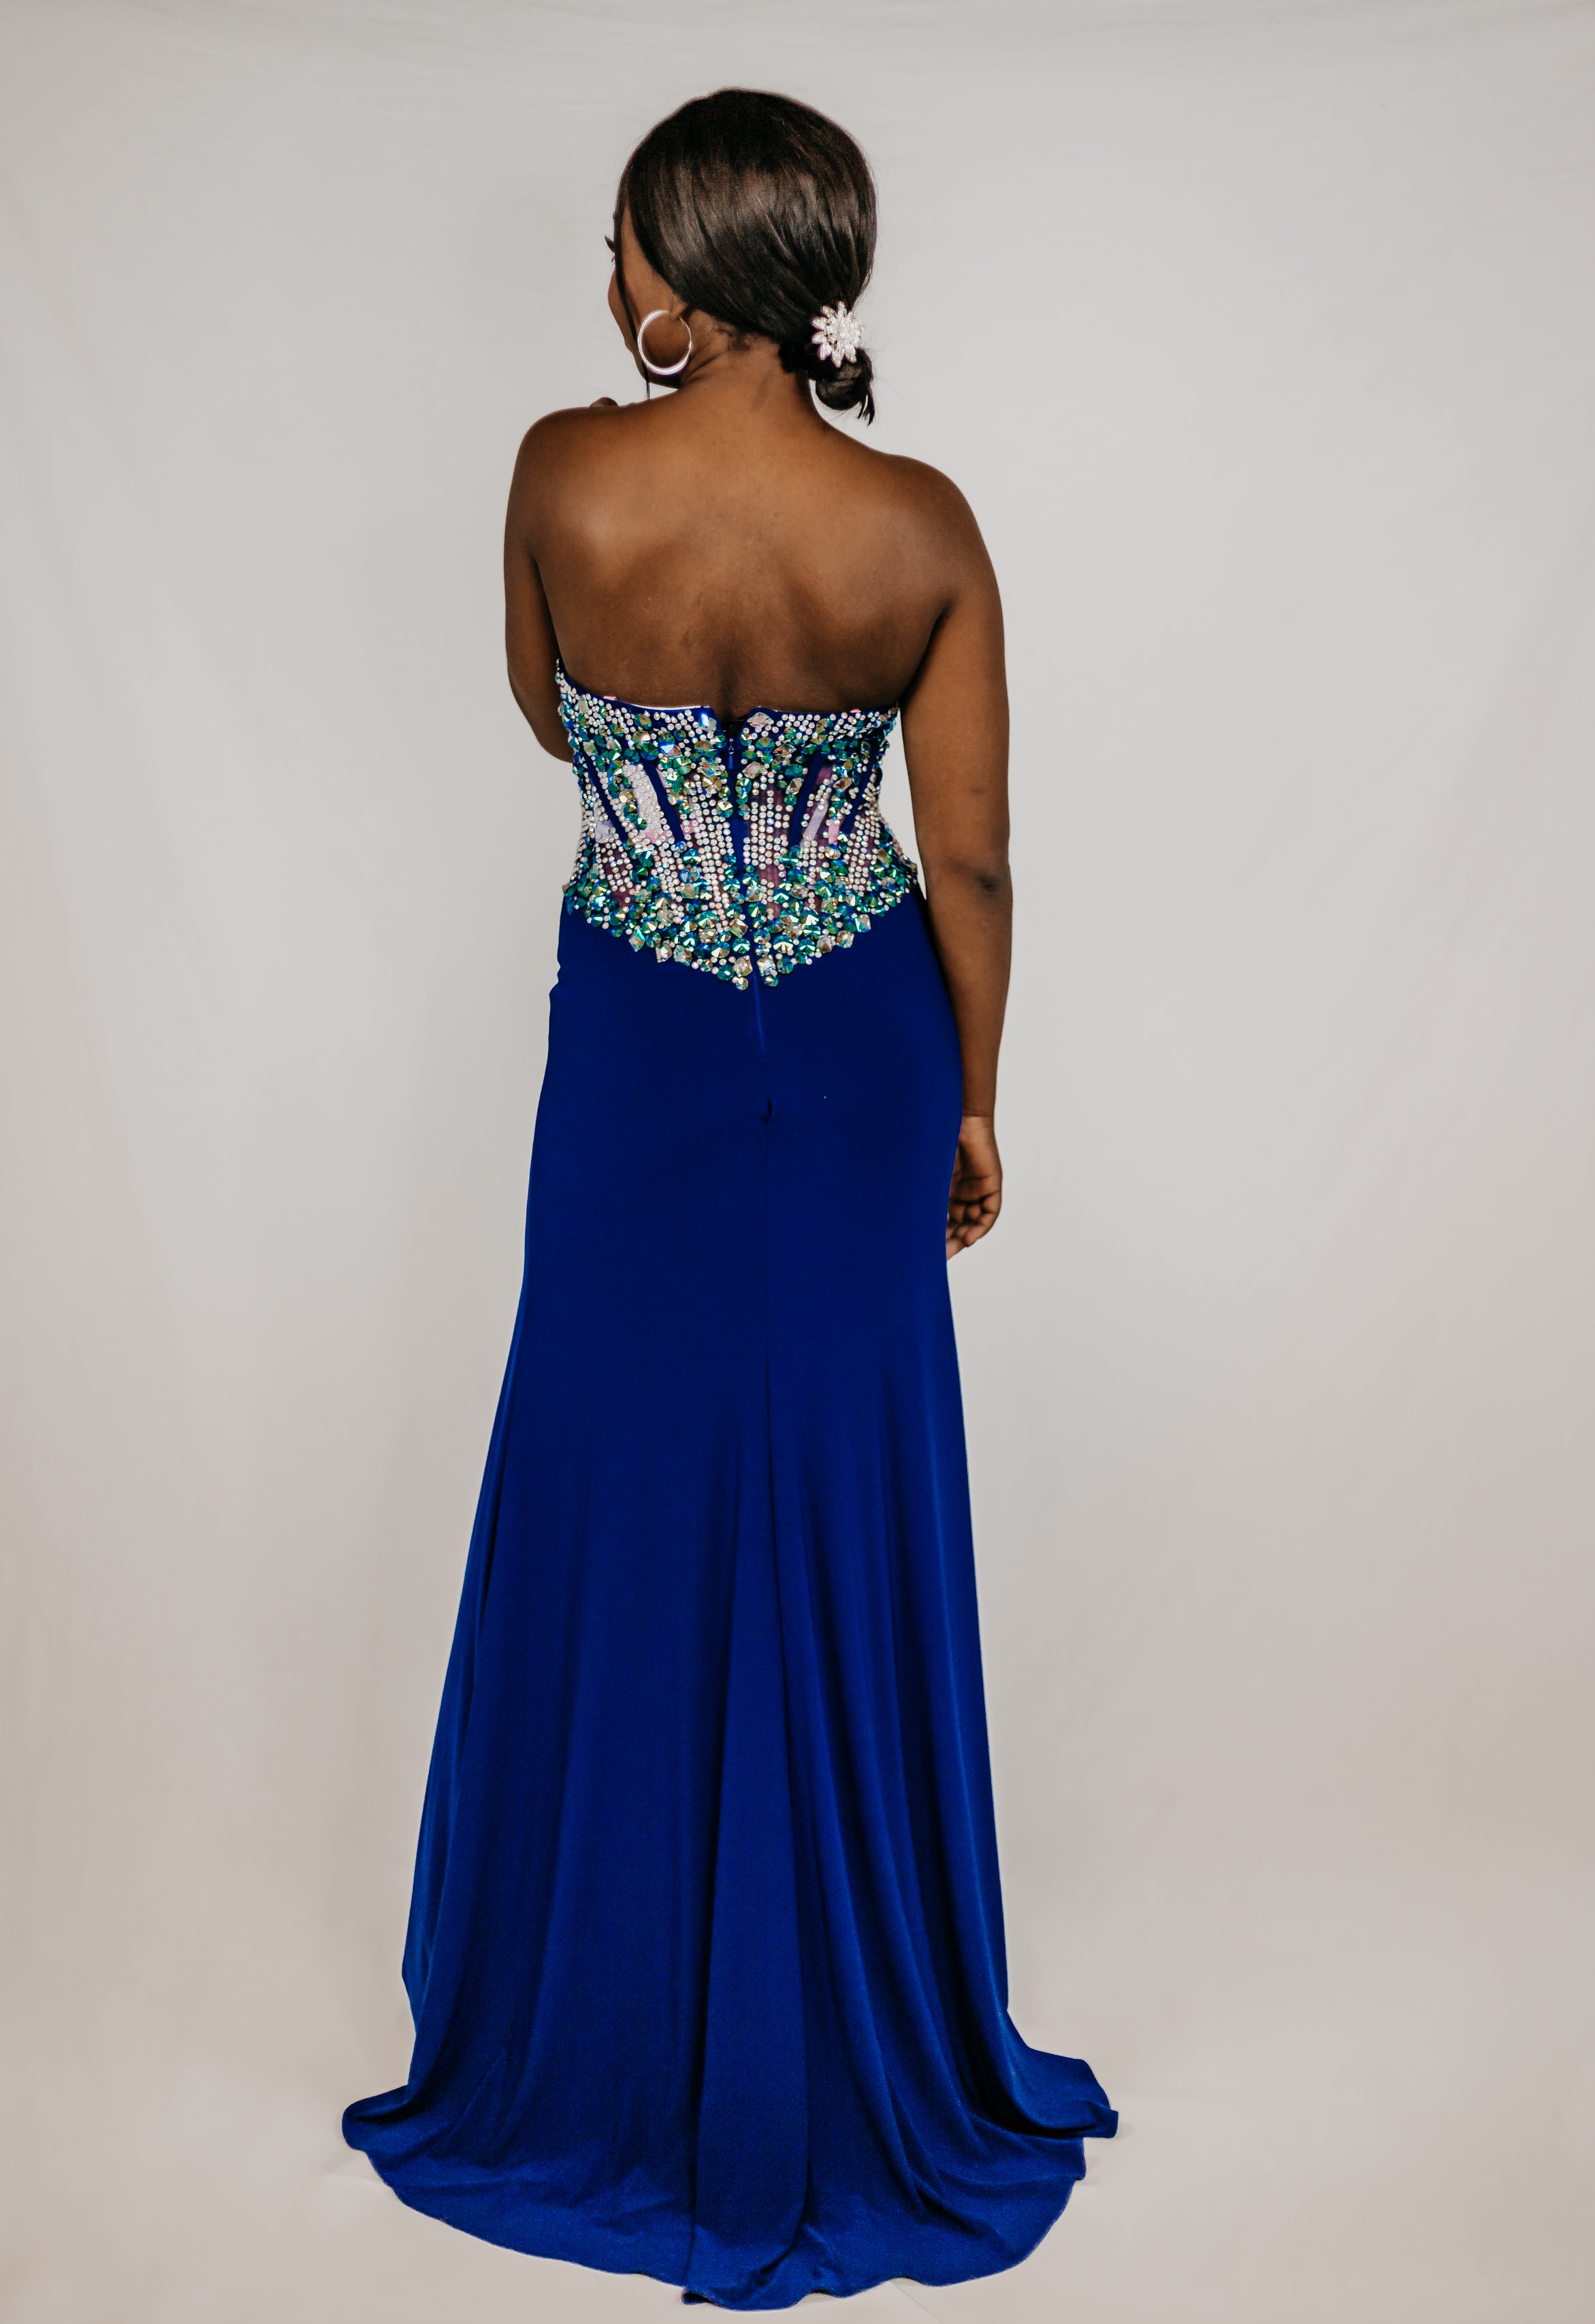 Strapless Royal Blue Evening Gown 691